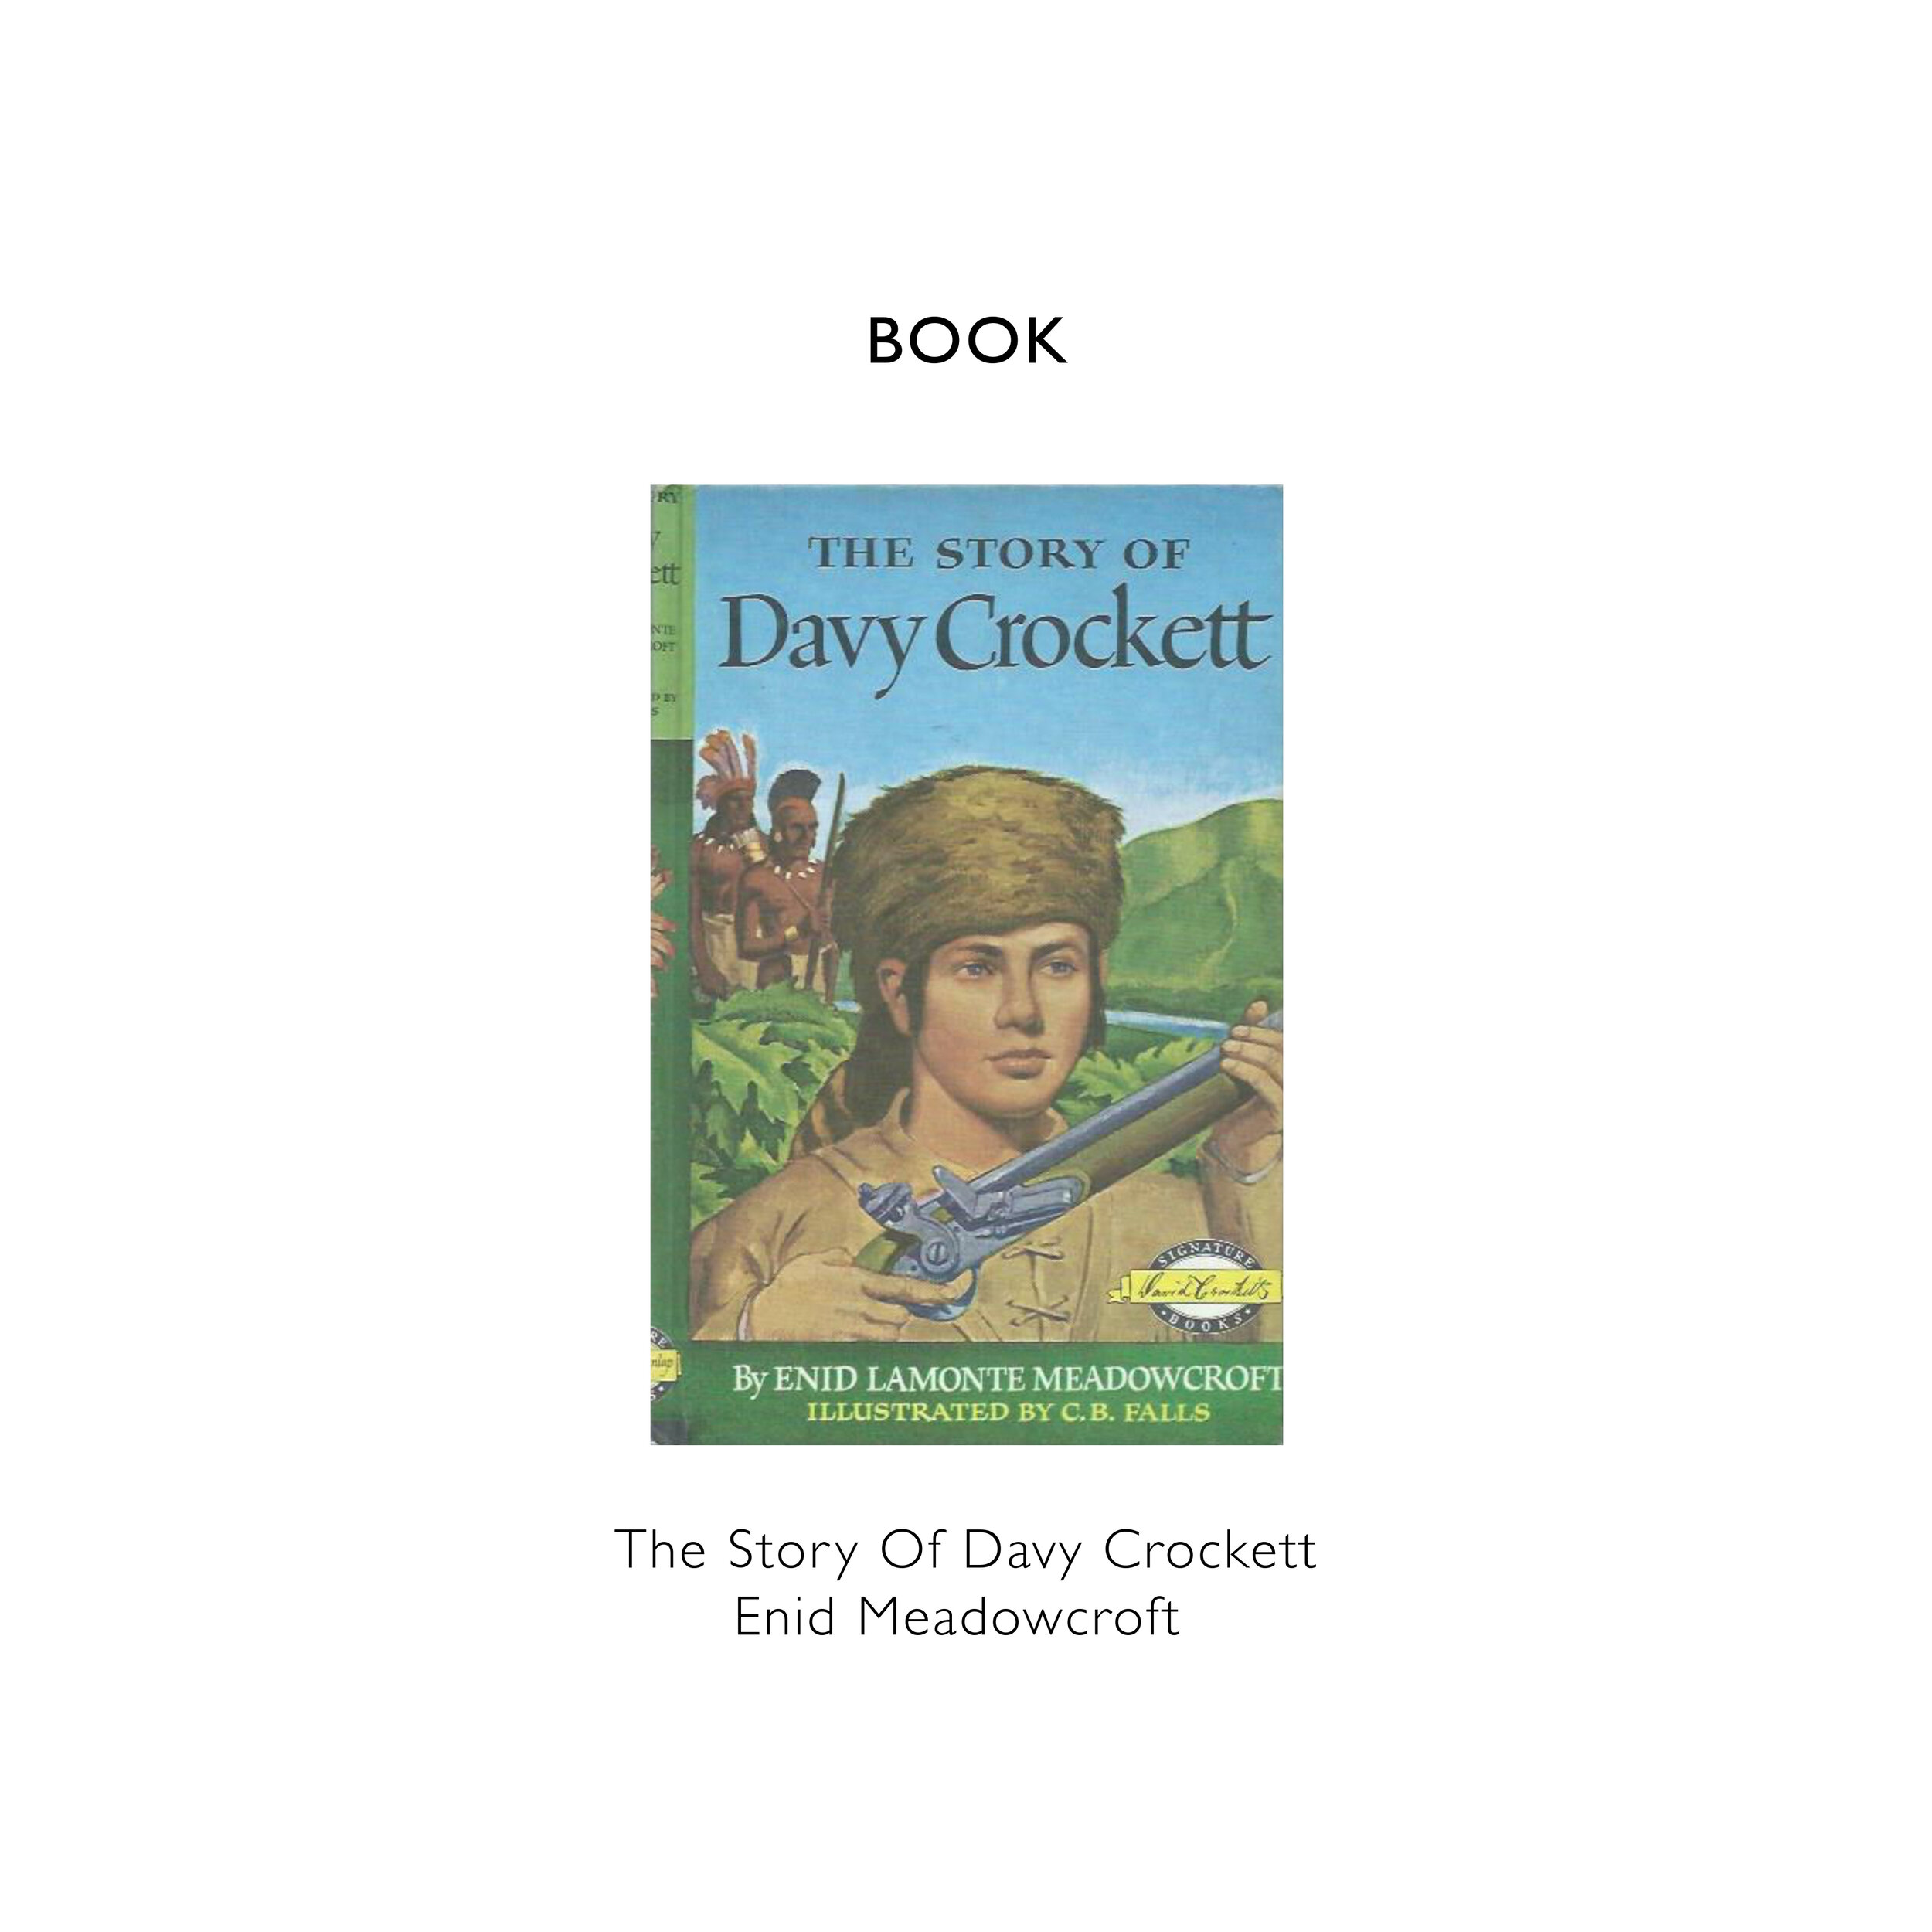 REFERENCE BLOG TEMPLATE The Story Of Davy Crockett Enid Meadowcroft   copy.jpg